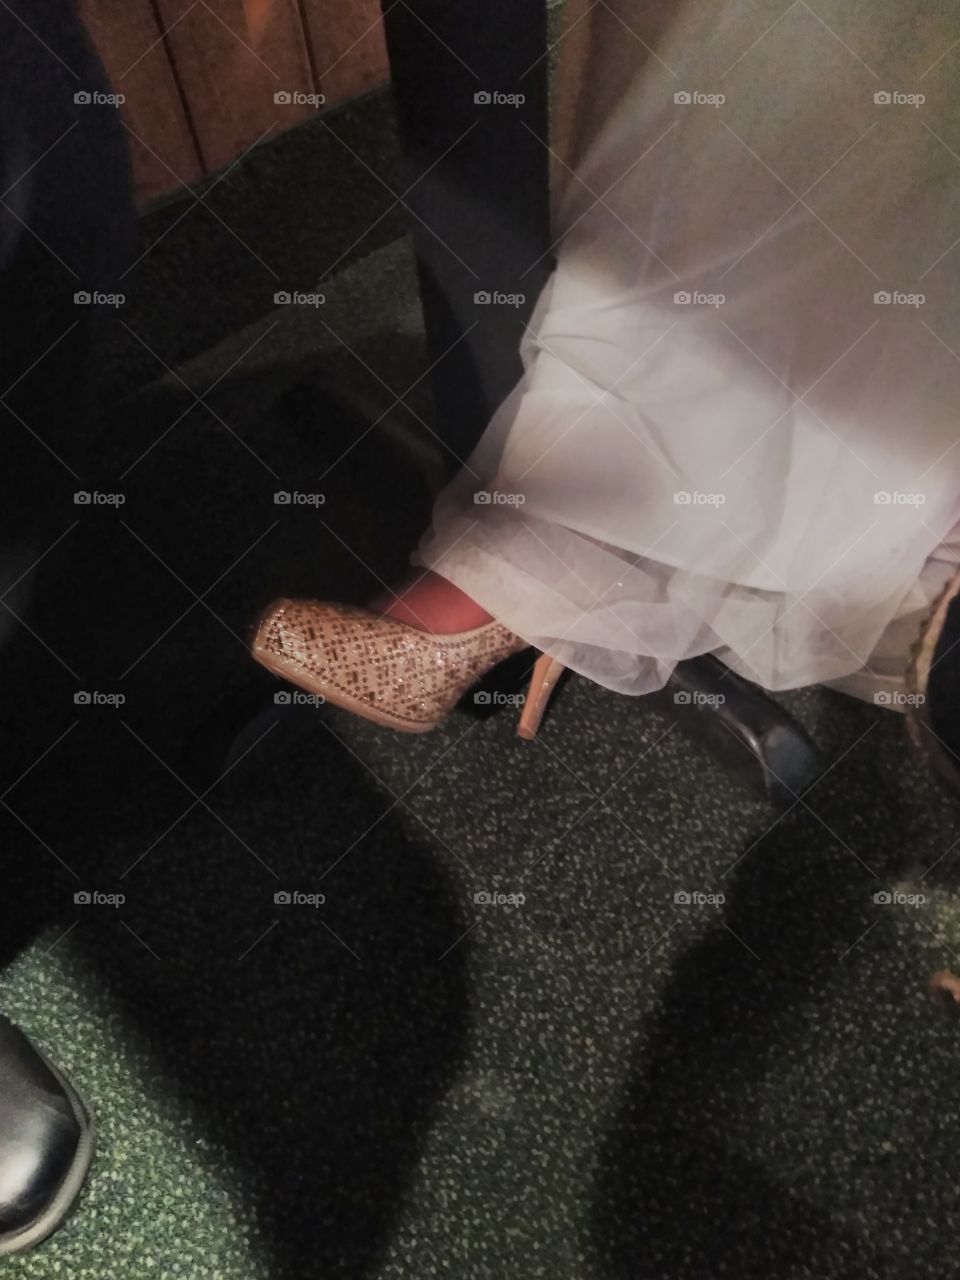 we were sitting at a table talking,  I happen to look down see the brides beautiful shoe,  so I snapped a pucture